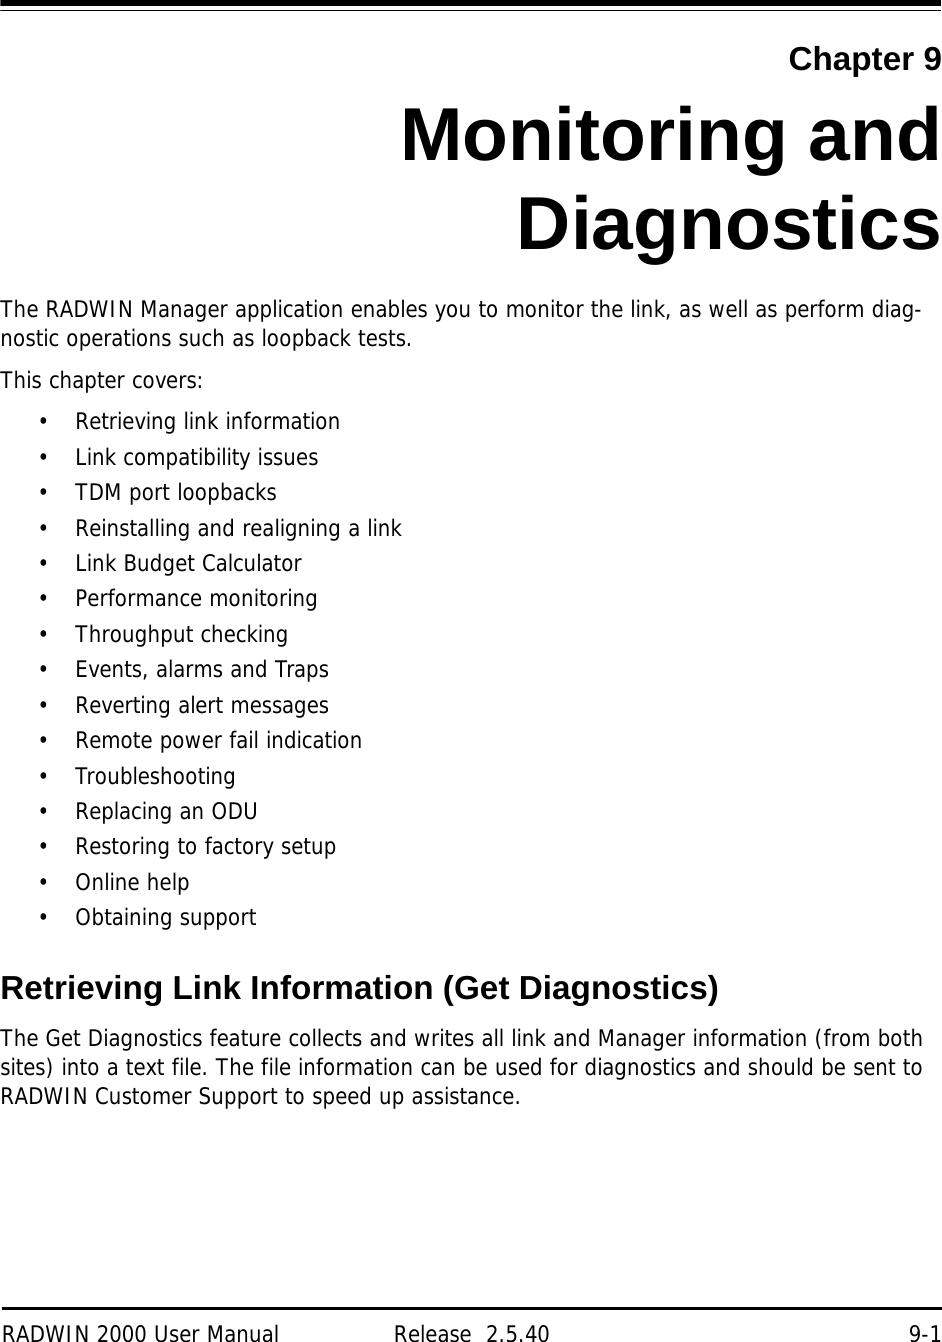 RADWIN 2000 User Manual Release  2.5.40 9-1Chapter 9Monitoring andDiagnosticsThe RADWIN Manager application enables you to monitor the link, as well as perform diag-nostic operations such as loopback tests.This chapter covers:• Retrieving link information• Link compatibility issues• TDM port loopbacks• Reinstalling and realigning a link• Link Budget Calculator• Performance monitoring• Throughput checking• Events, alarms and Traps• Reverting alert messages• Remote power fail indication• Troubleshooting•Replacing an ODU• Restoring to factory setup• Online help• Obtaining supportRetrieving Link Information (Get Diagnostics)The Get Diagnostics feature collects and writes all link and Manager information (from both sites) into a text file. The file information can be used for diagnostics and should be sent to RADWIN Customer Support to speed up assistance.